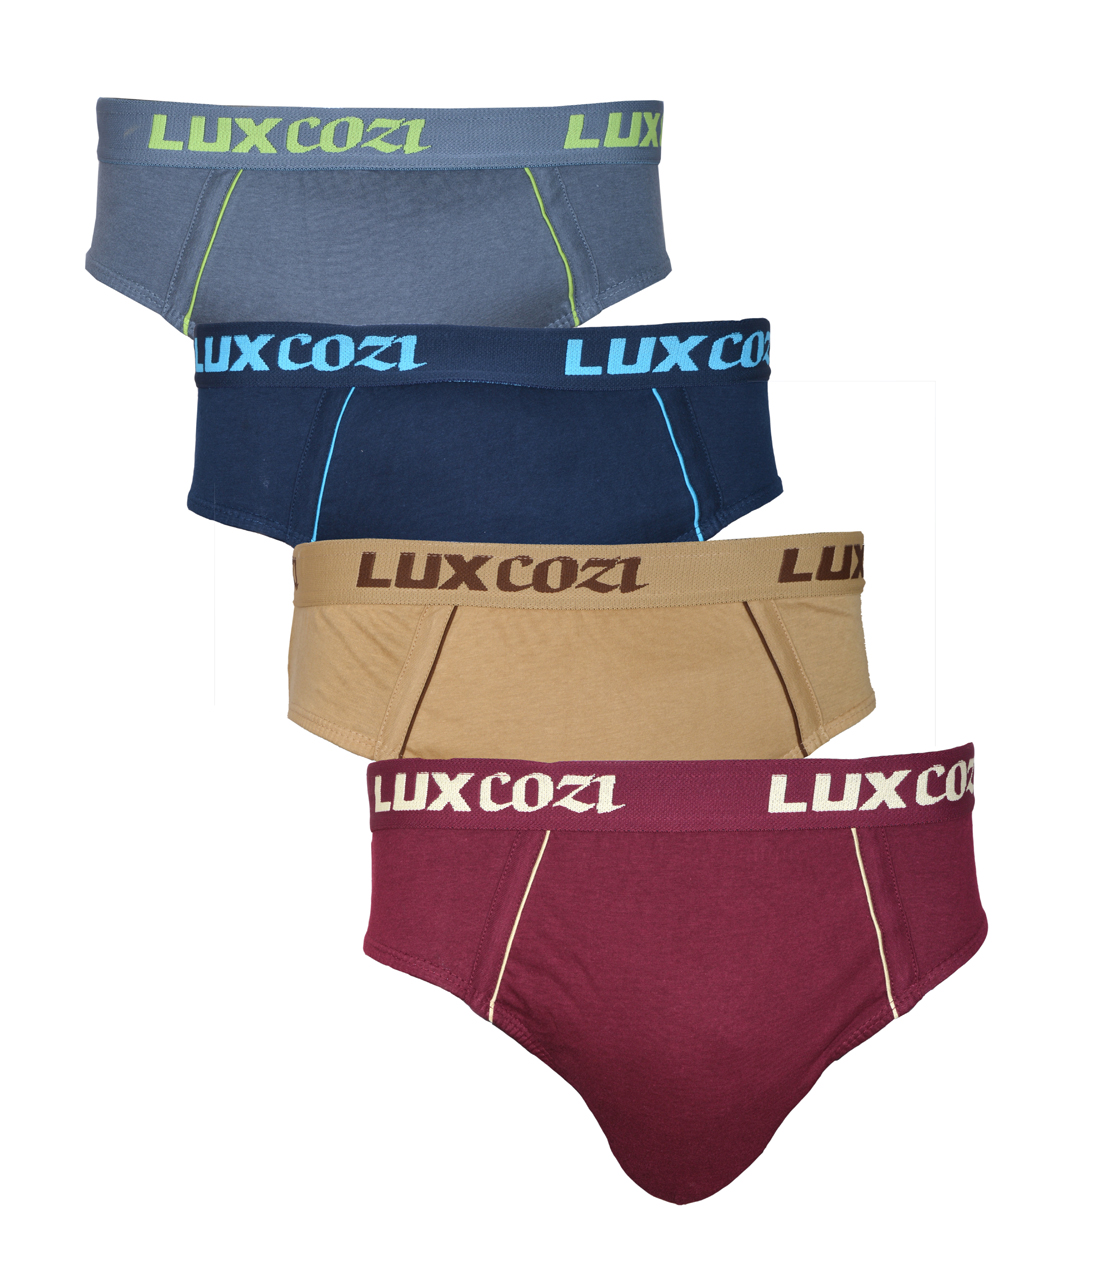 Buy Lux Cozi Bigshot Stylish pack of 4 Briefs Online @ ₹476 from ShopClues